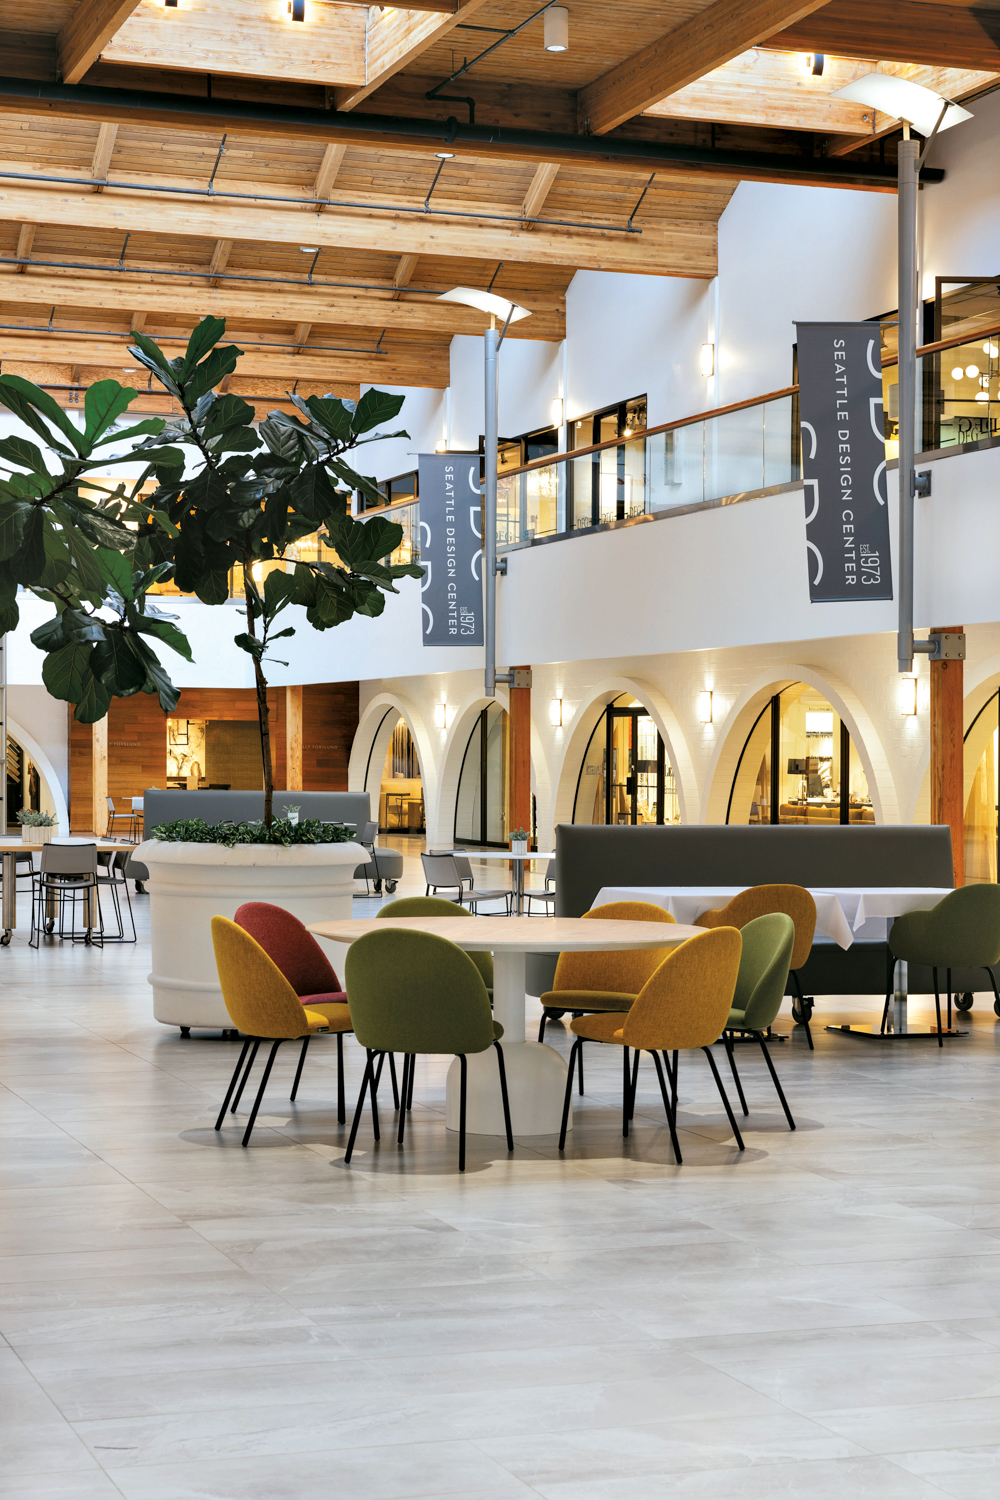 Seattle Design Center area featuring trees in oversize planters and tables surrounded by upholstered chairs